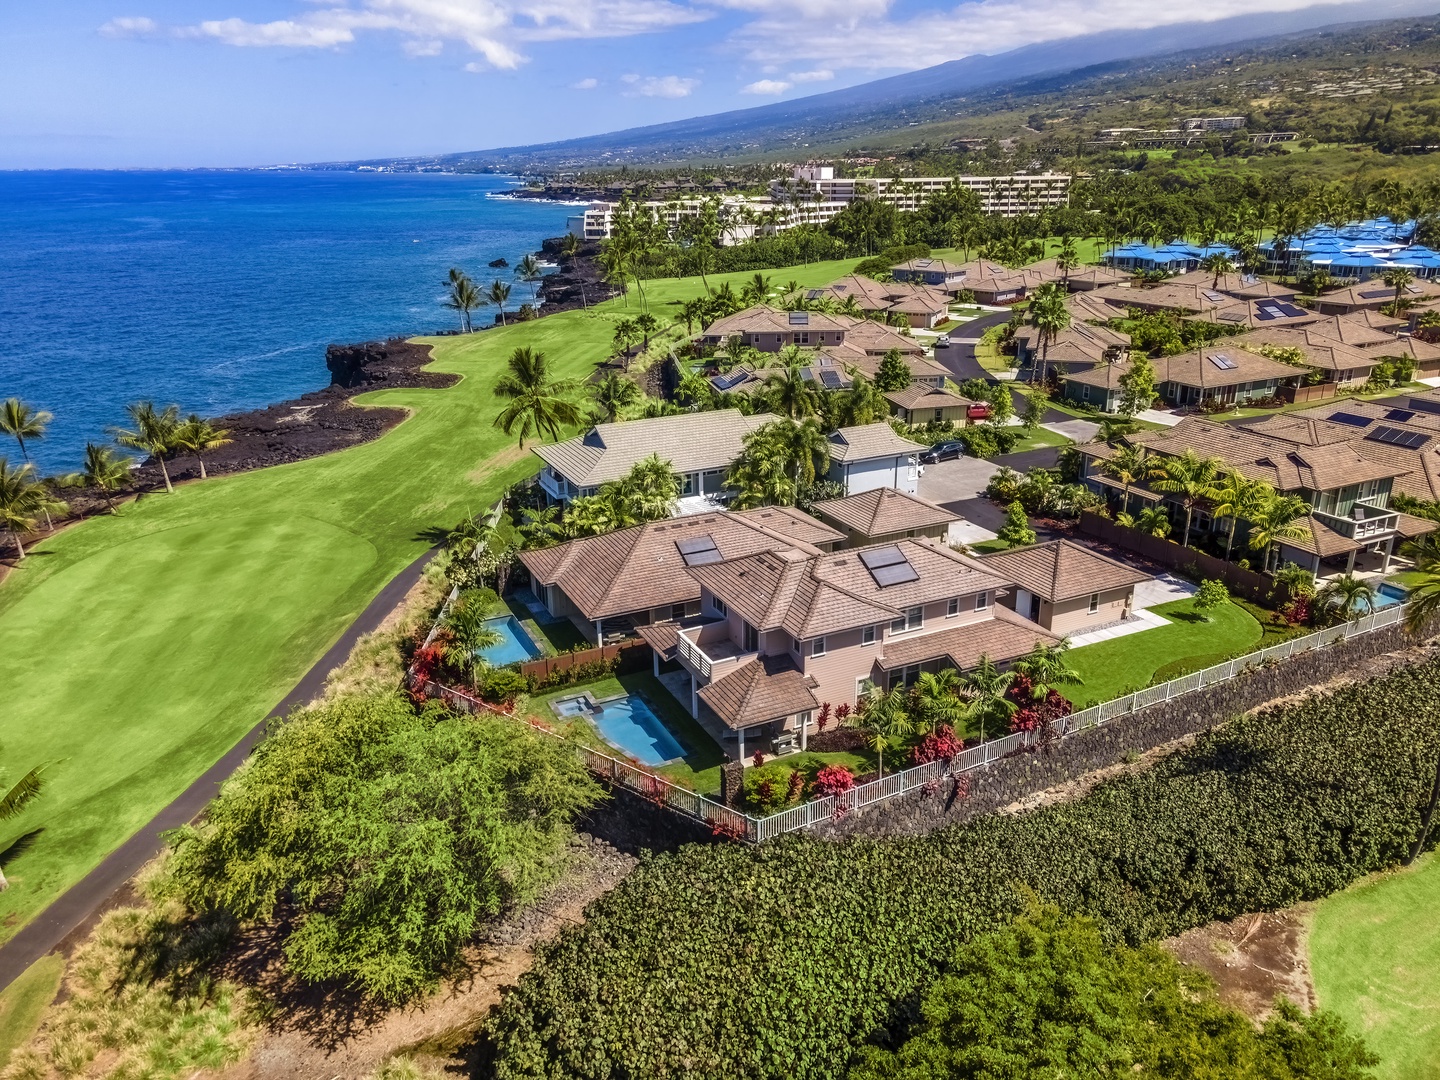 Kailua Kona Vacation Rentals, Blue Orca - Zoomed out aerial view